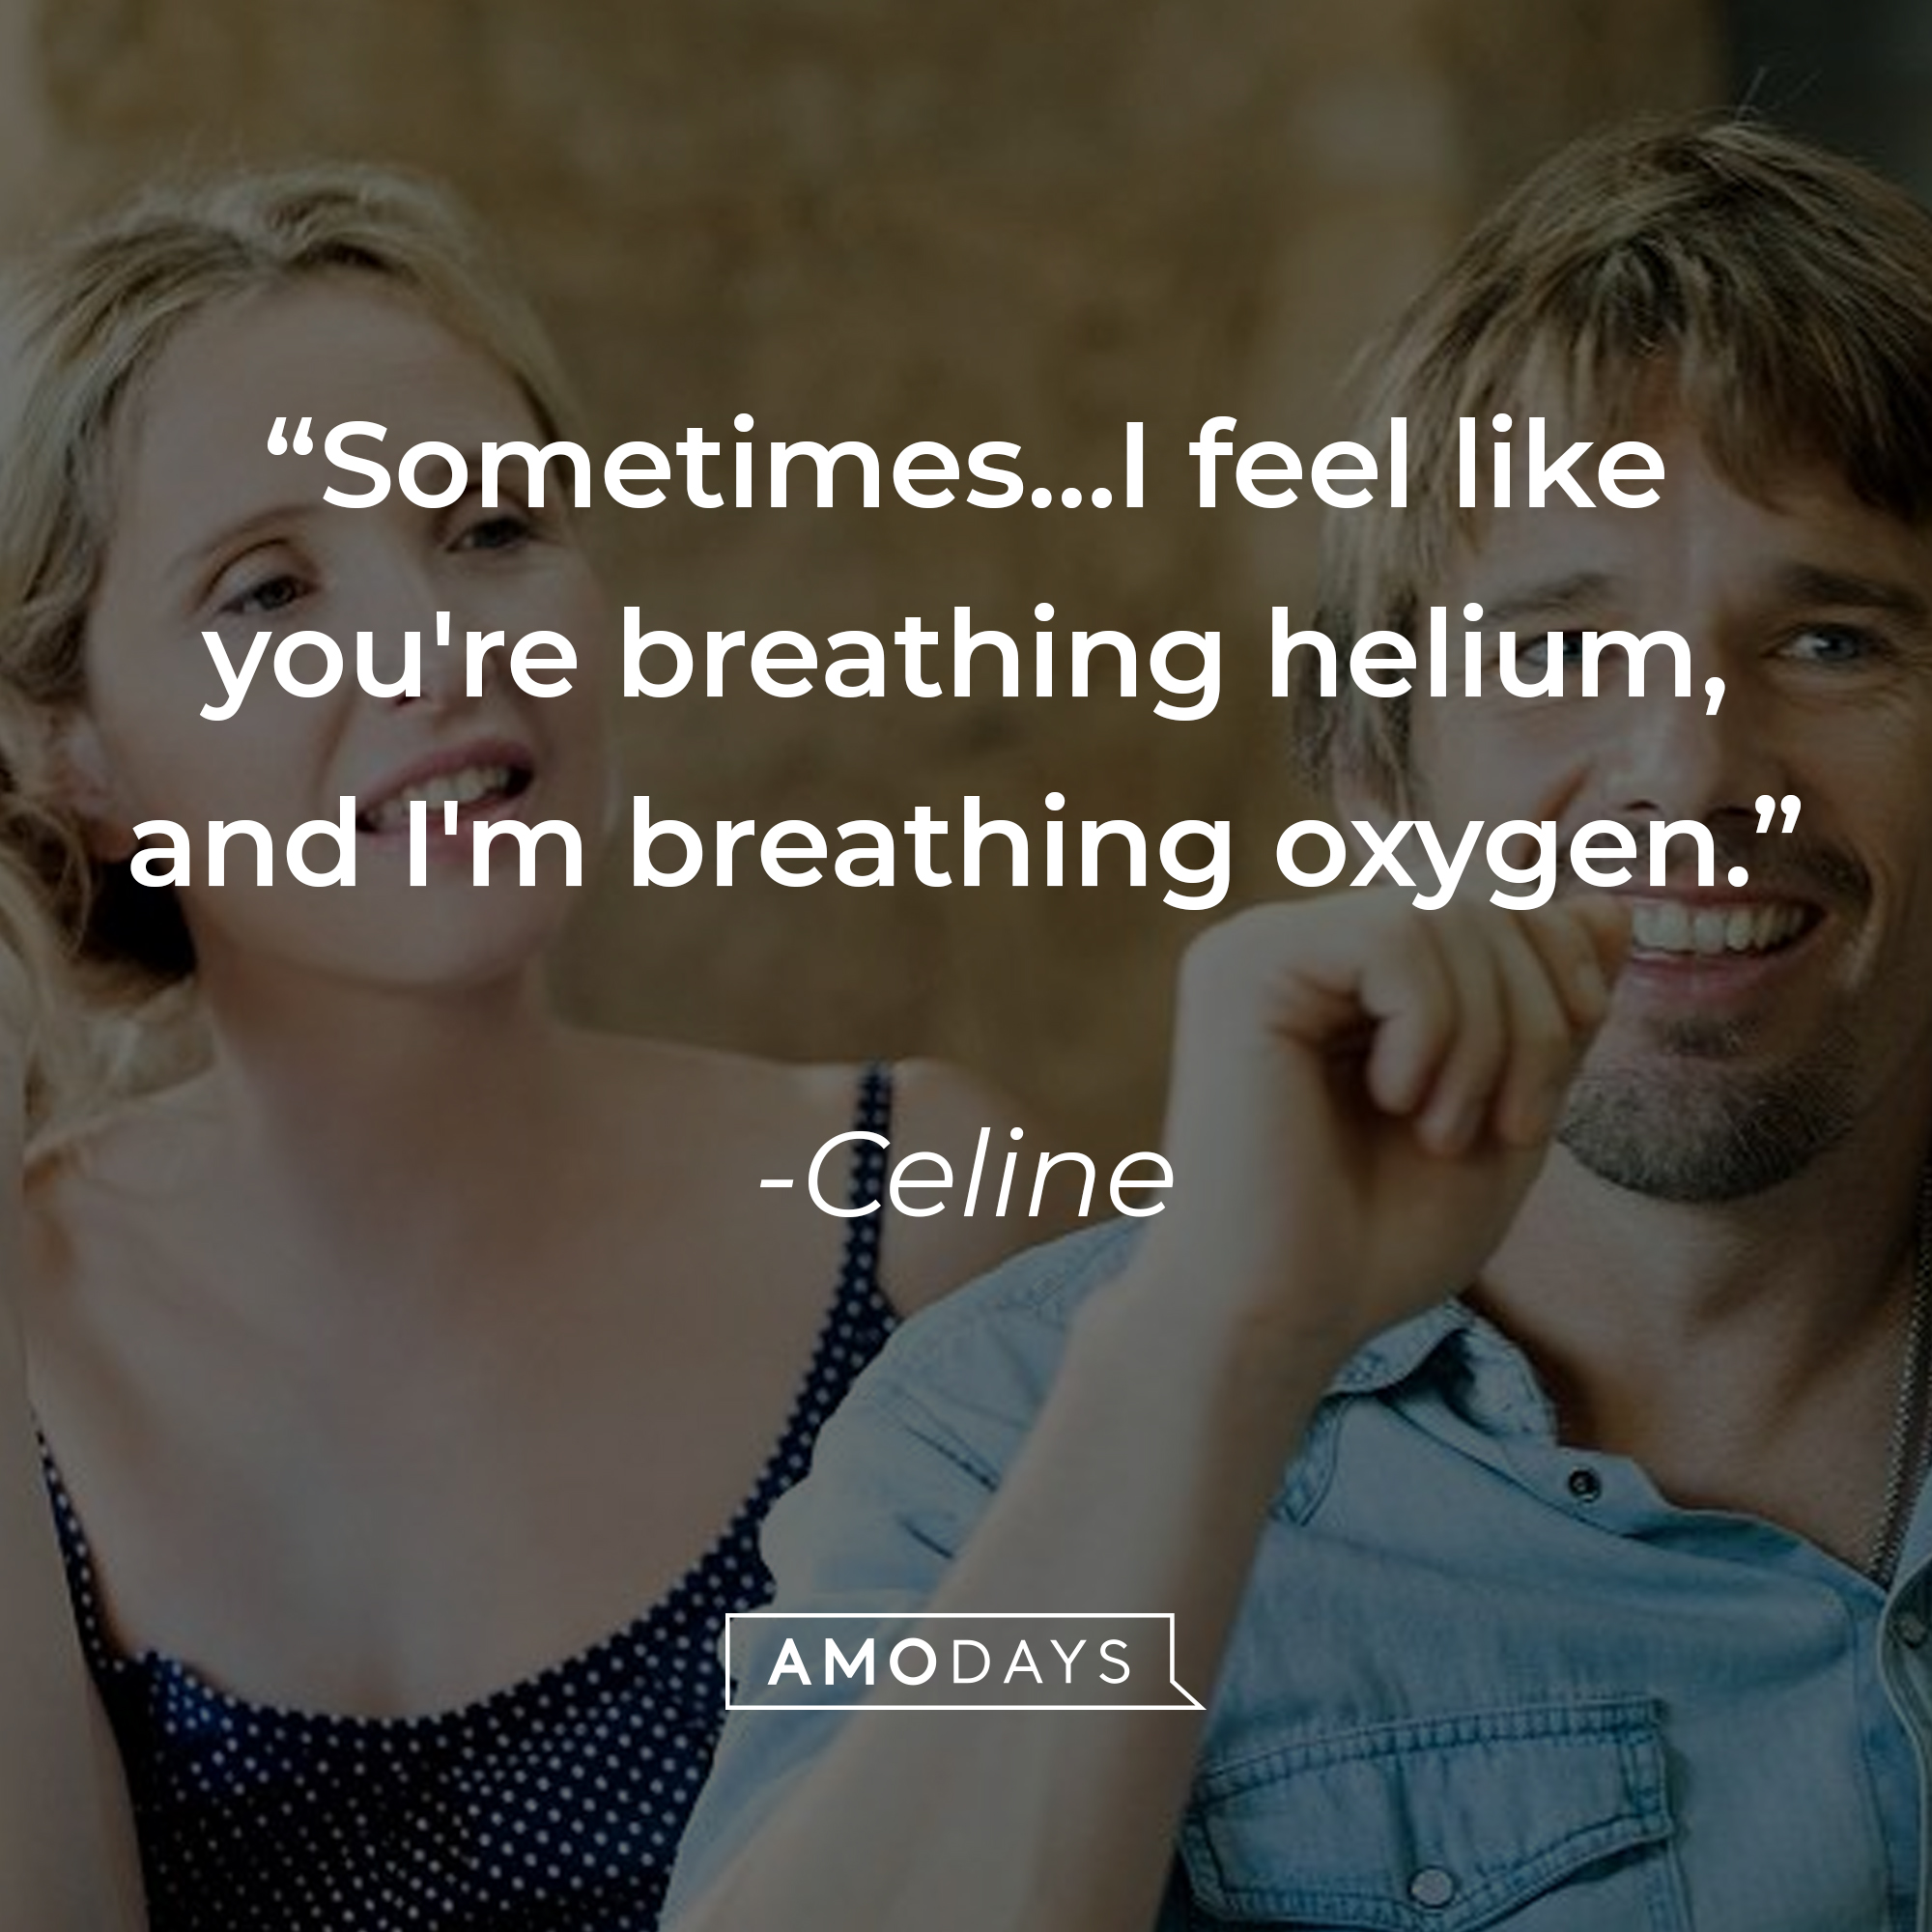 Jesse and Celine, with Celine’s quote: “Sometimes…I feel like you're breathing helium, and I'm breathing oxygen.” │Source: facebook.com/BeforeMidnightFilm